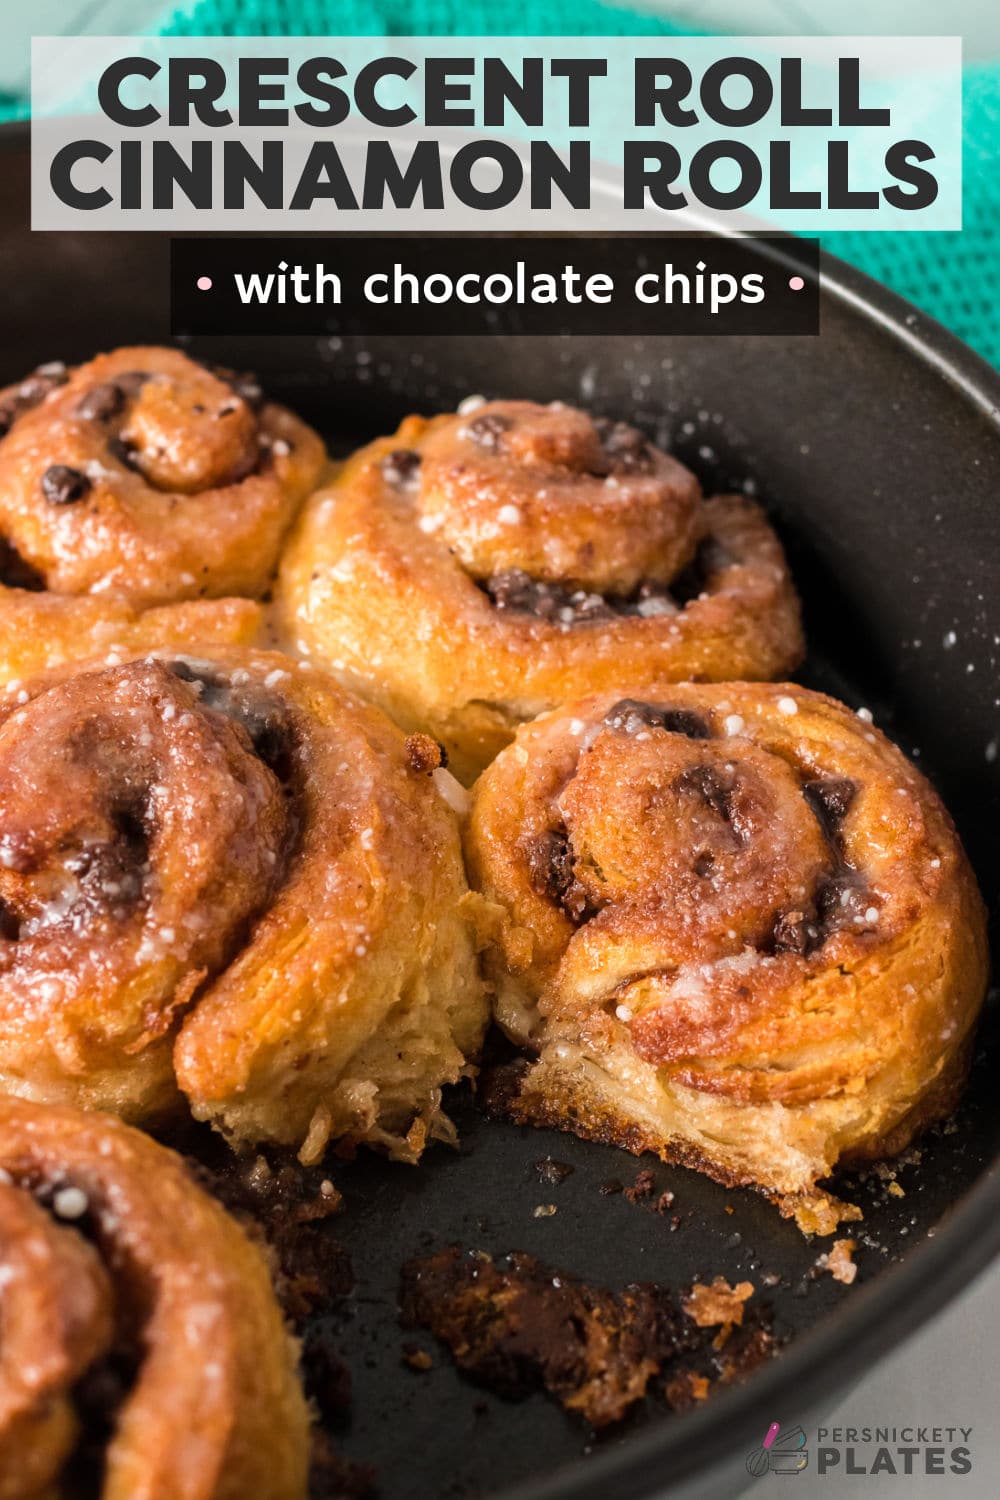 Cinnamon rolls made with crescent rolls will be your new best brunch idea! These chocolate chip crescent roll cinnamon rolls take less than 10 minutes to prep and seconds to eat! Perfect with your morning coffee or on the go breakfast. | www.persnicketyplates.com